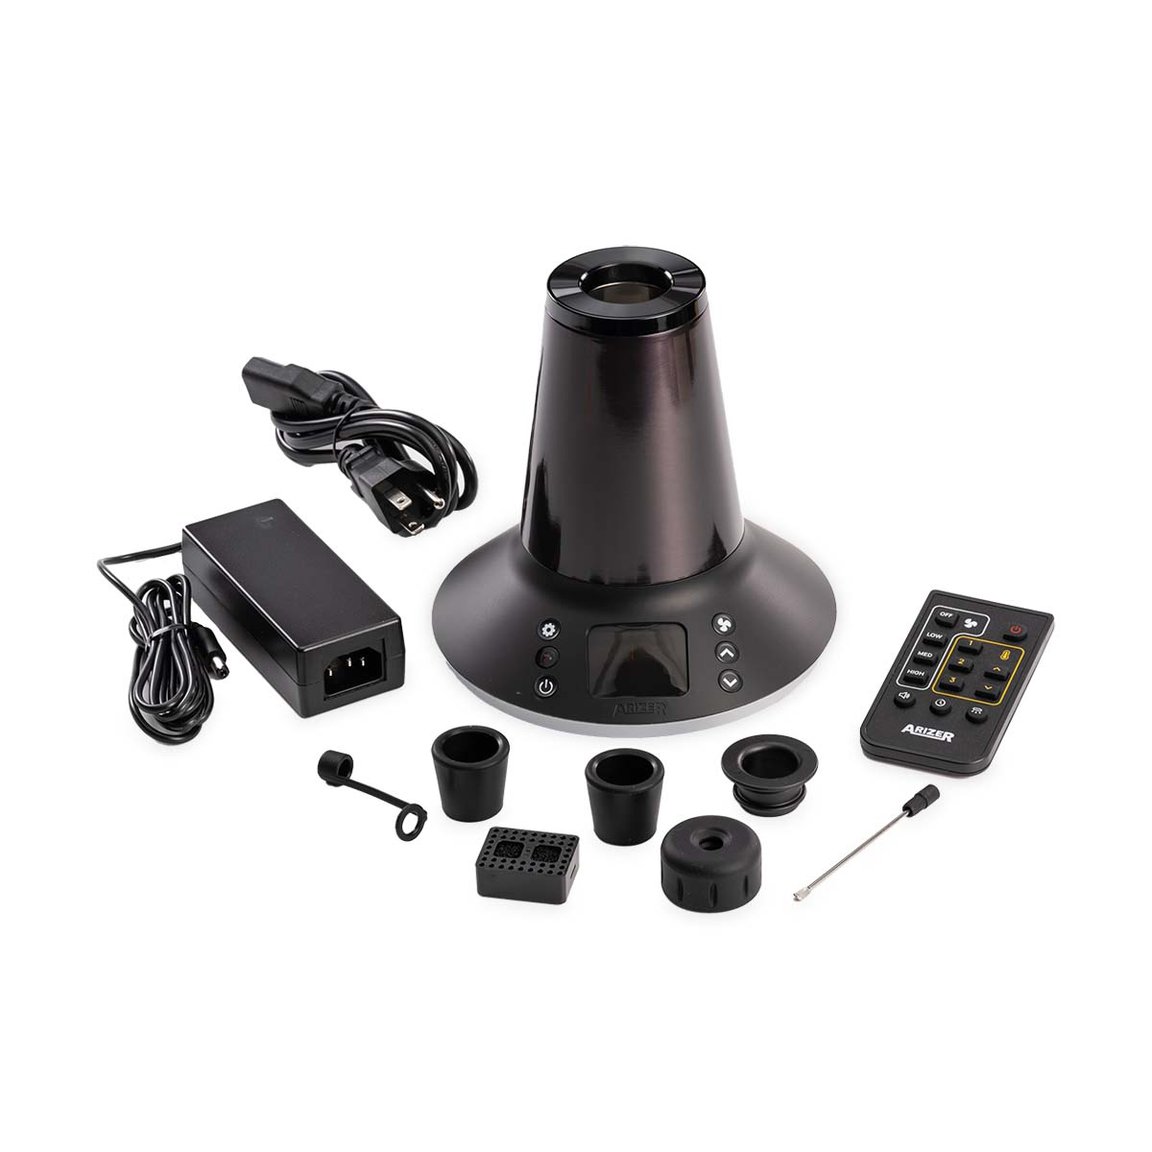 xq2-vaporizer-by-arizer-along-with-all-parts_576x@2x.jpg